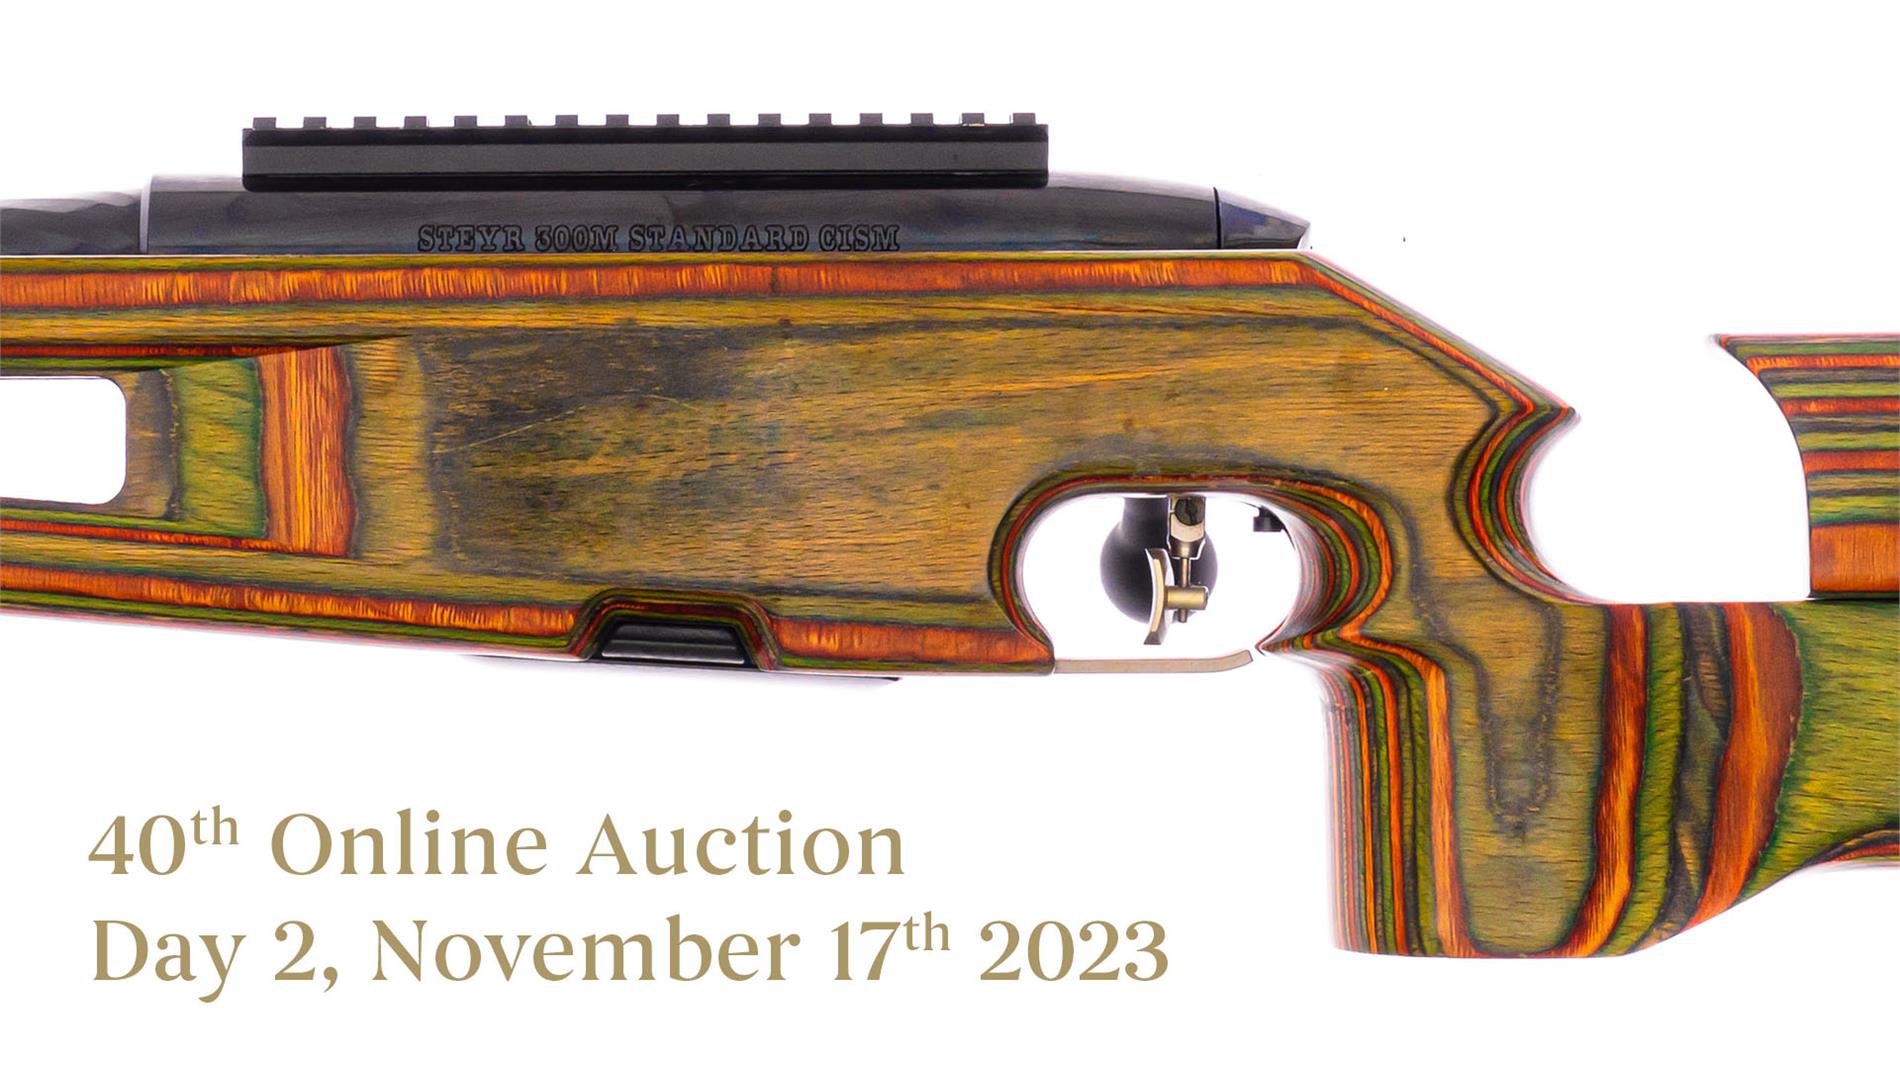 40th Classic Auction - Day 2 Online Auction